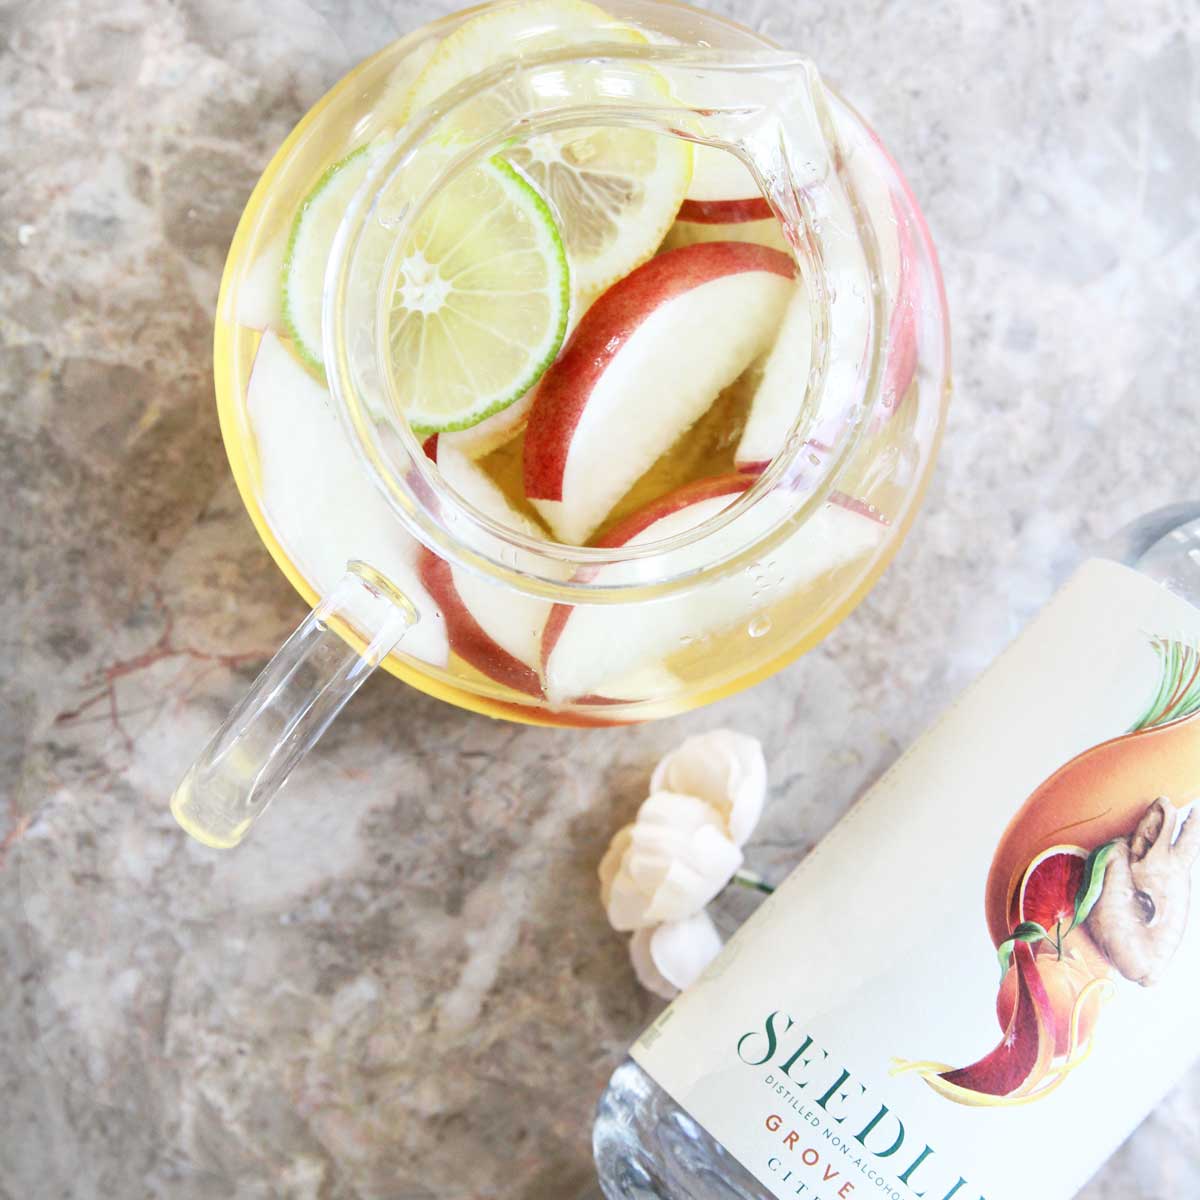 Non-Alcoholic White Sangria Made with Seedlip (Low Calorie) - Non-Alcoholic spiced wine